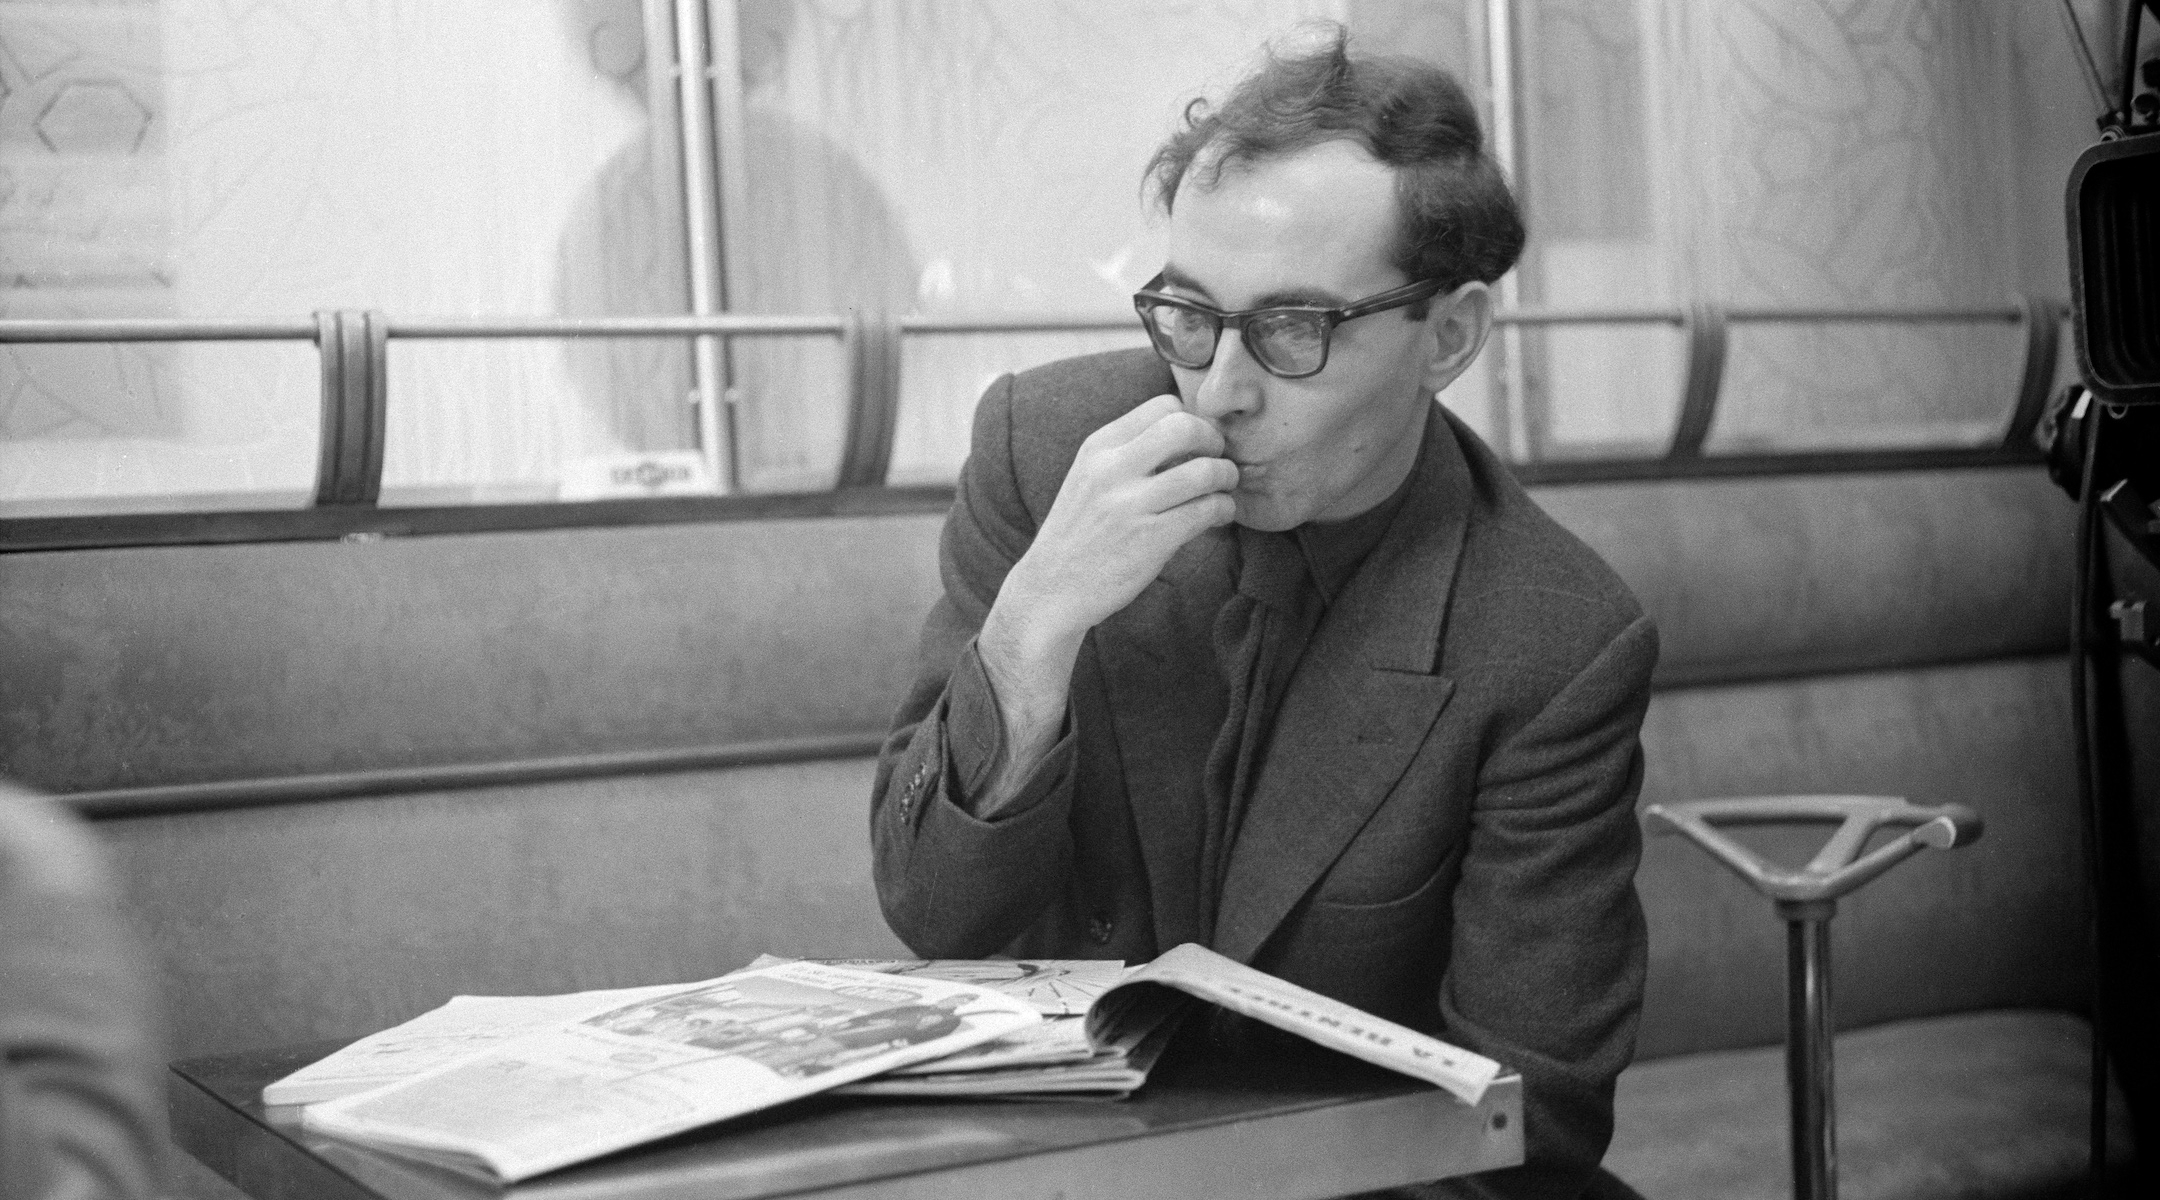 Jean-Luc Godard, revolutionary filmmaker who polarized Jews with his Israel and Holocaust commentary, dies at 91